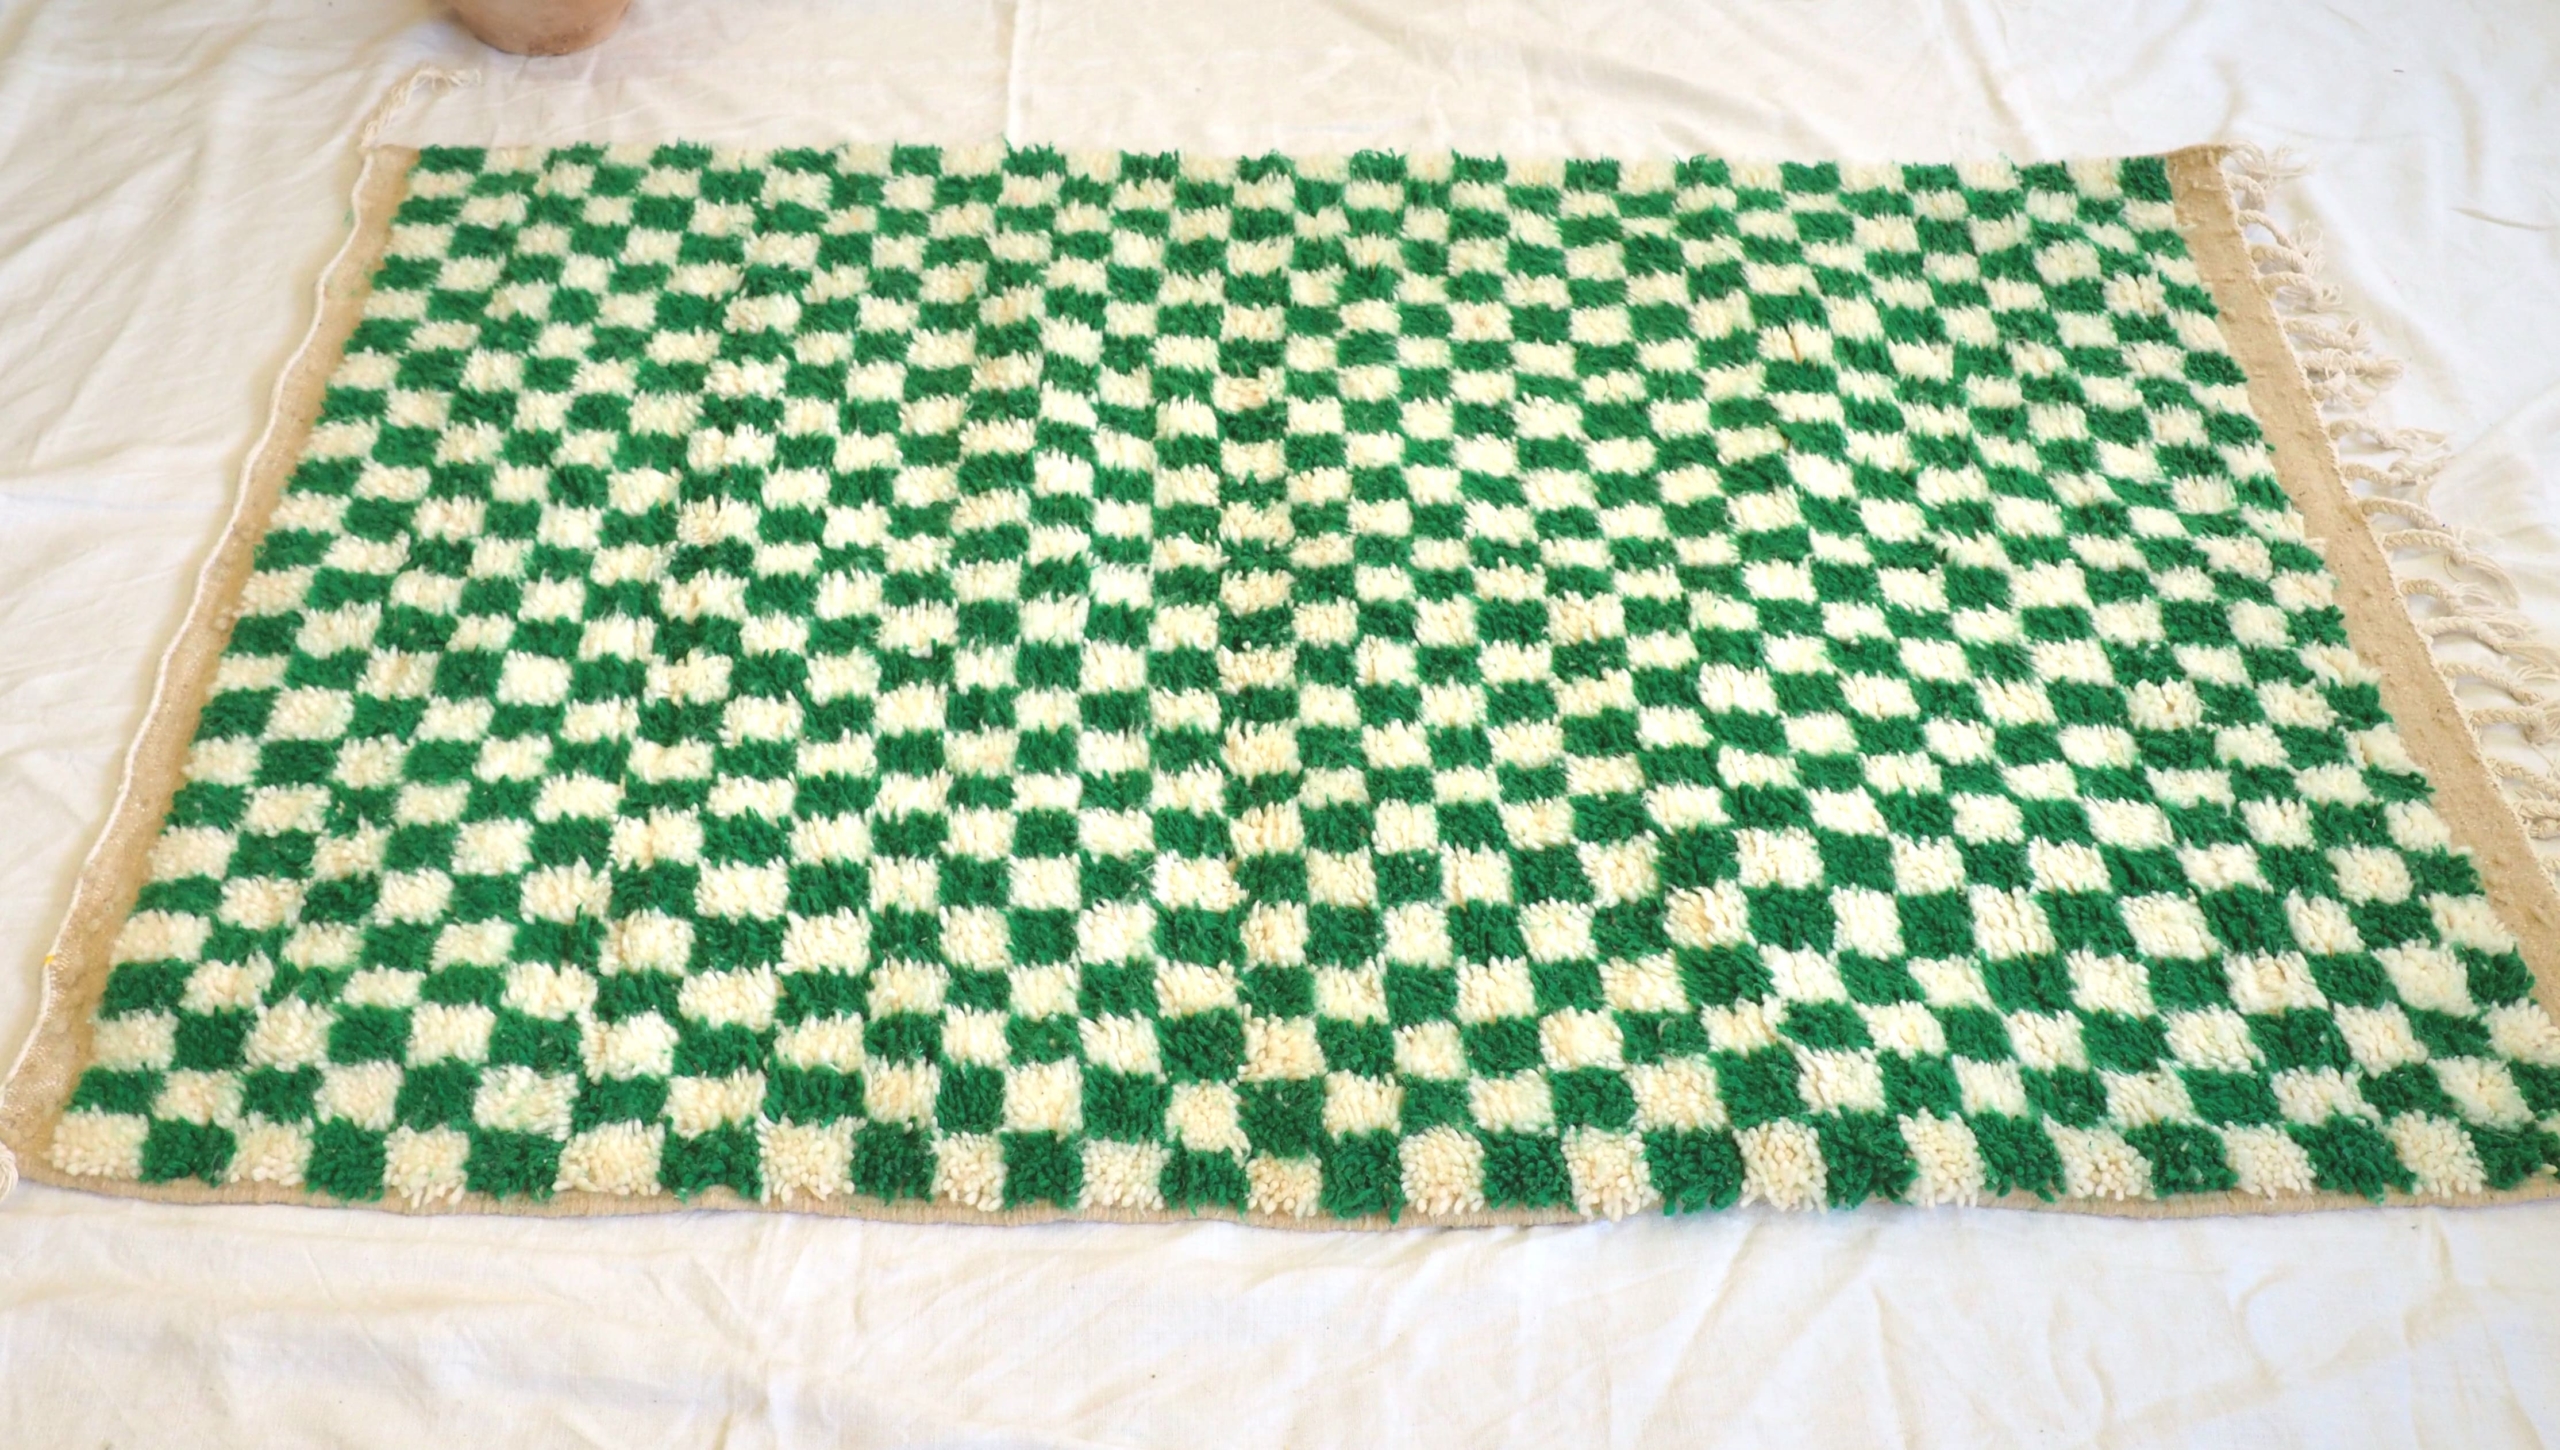 Authentic Berber Moroccan white and green wool carpet